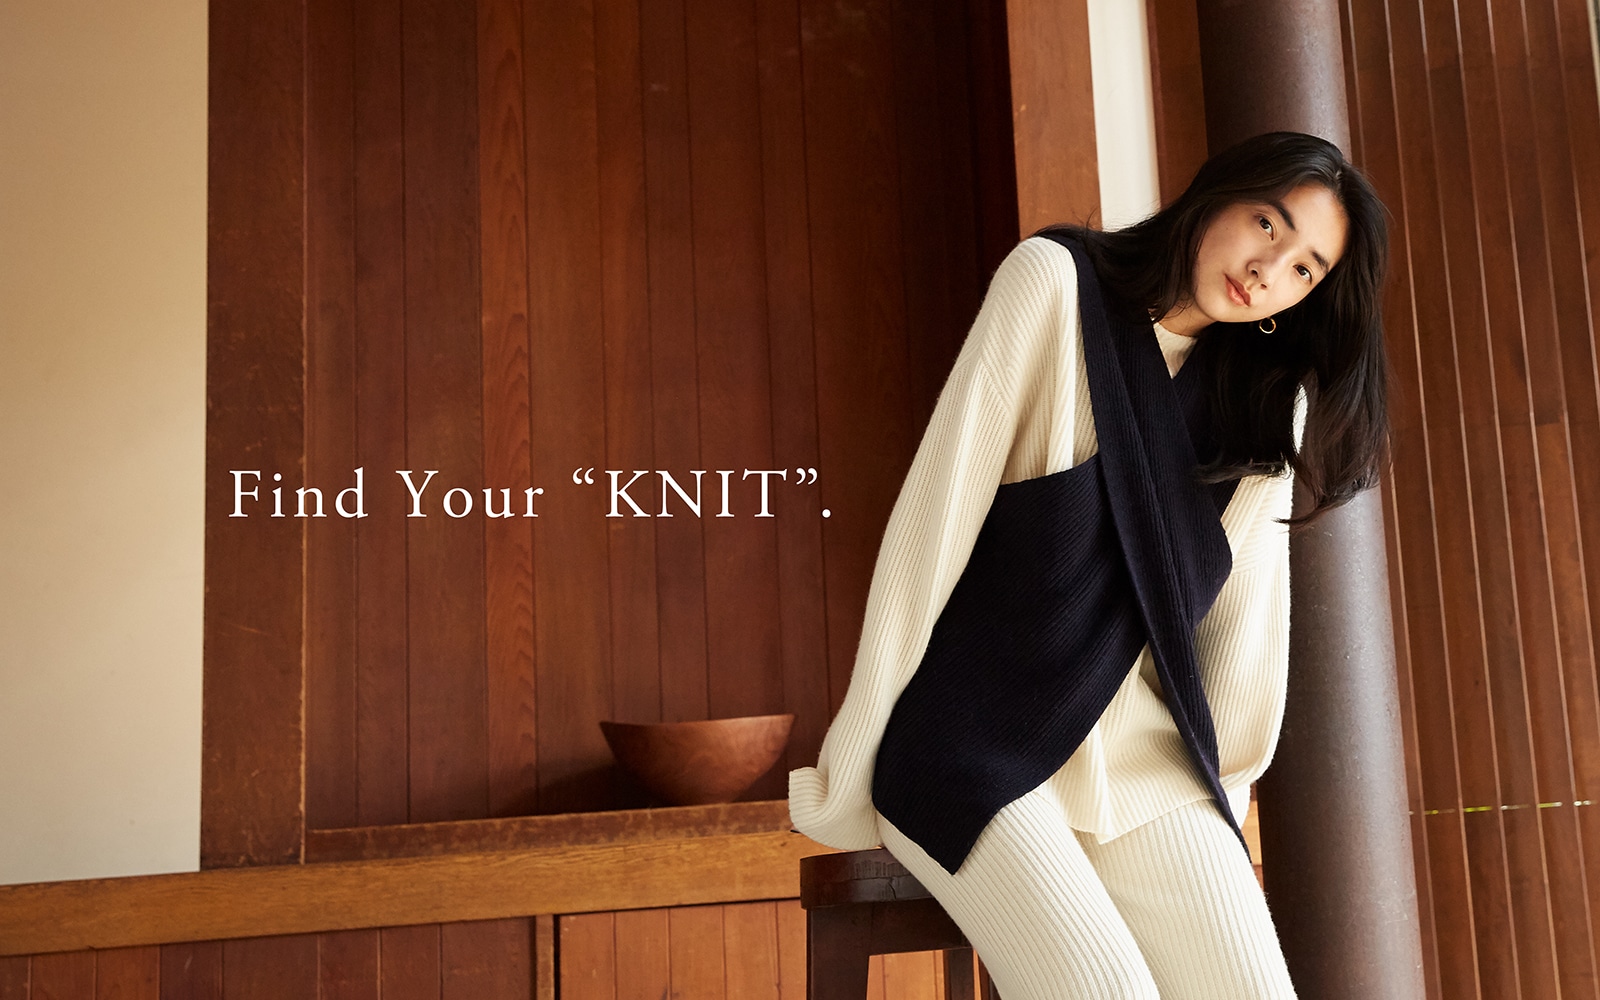 Find Your “KNIT”.